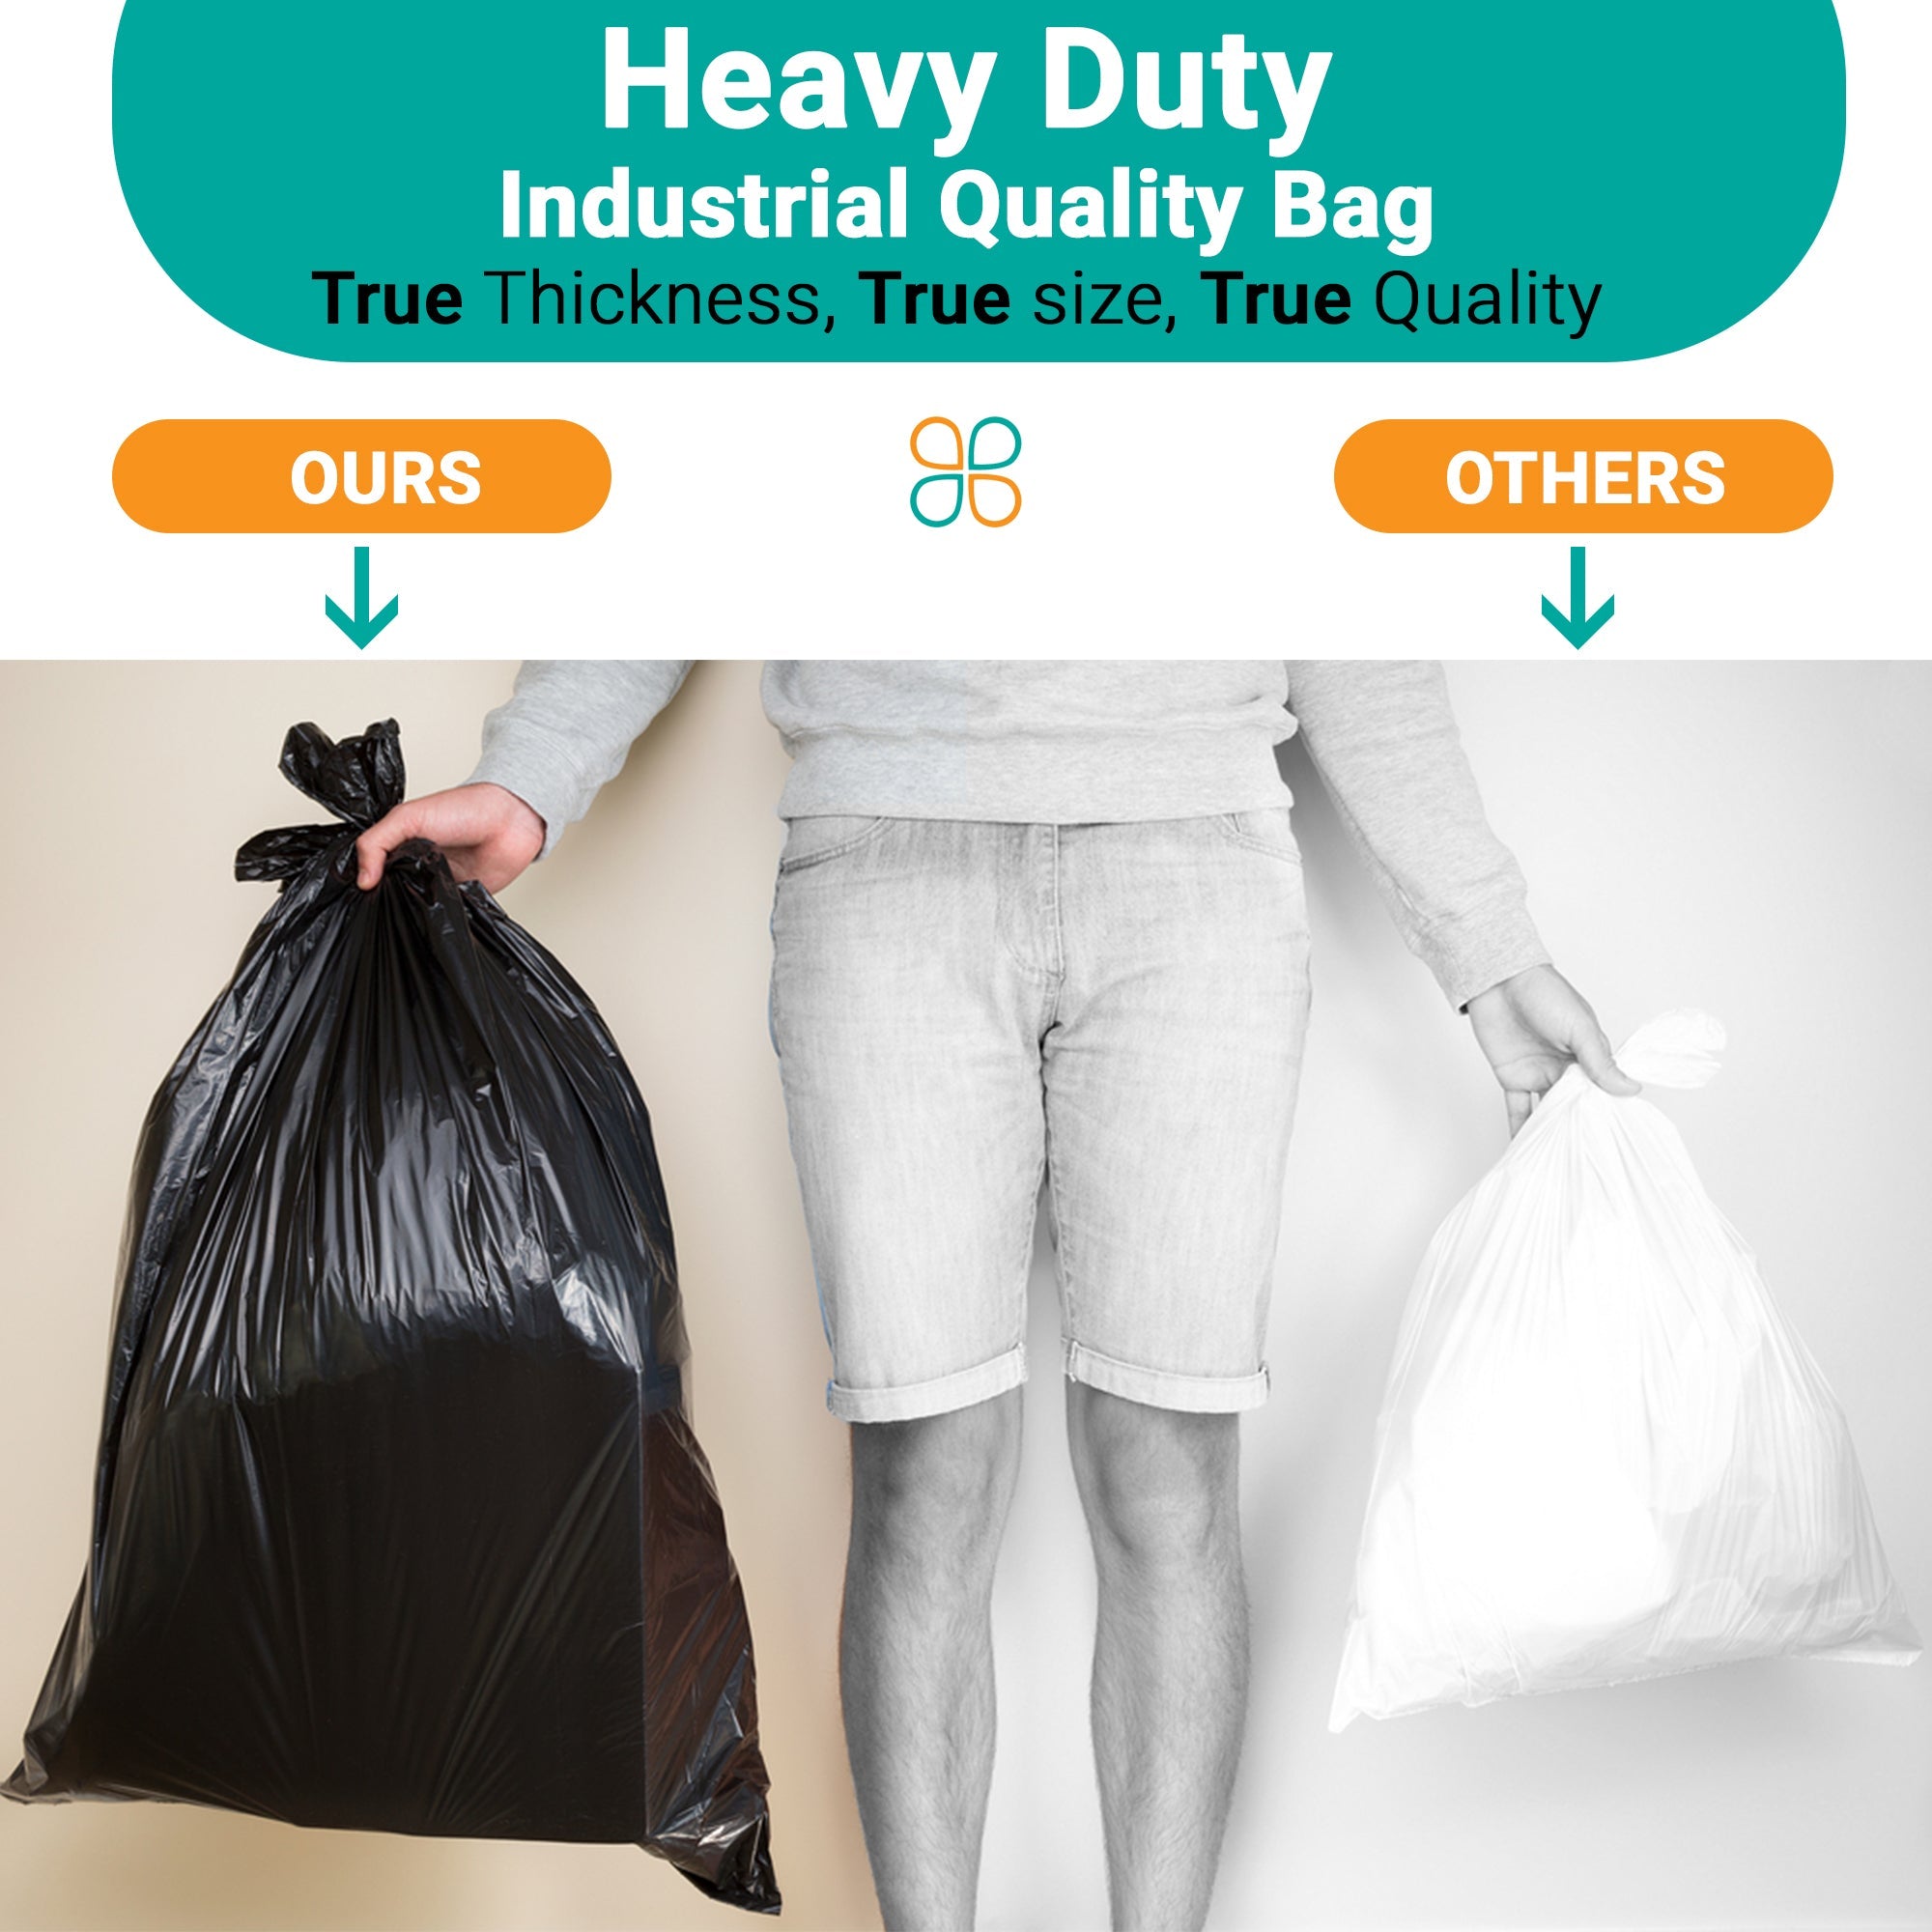 Wholesale 3 mil trash bags For All Your Storage Demands –